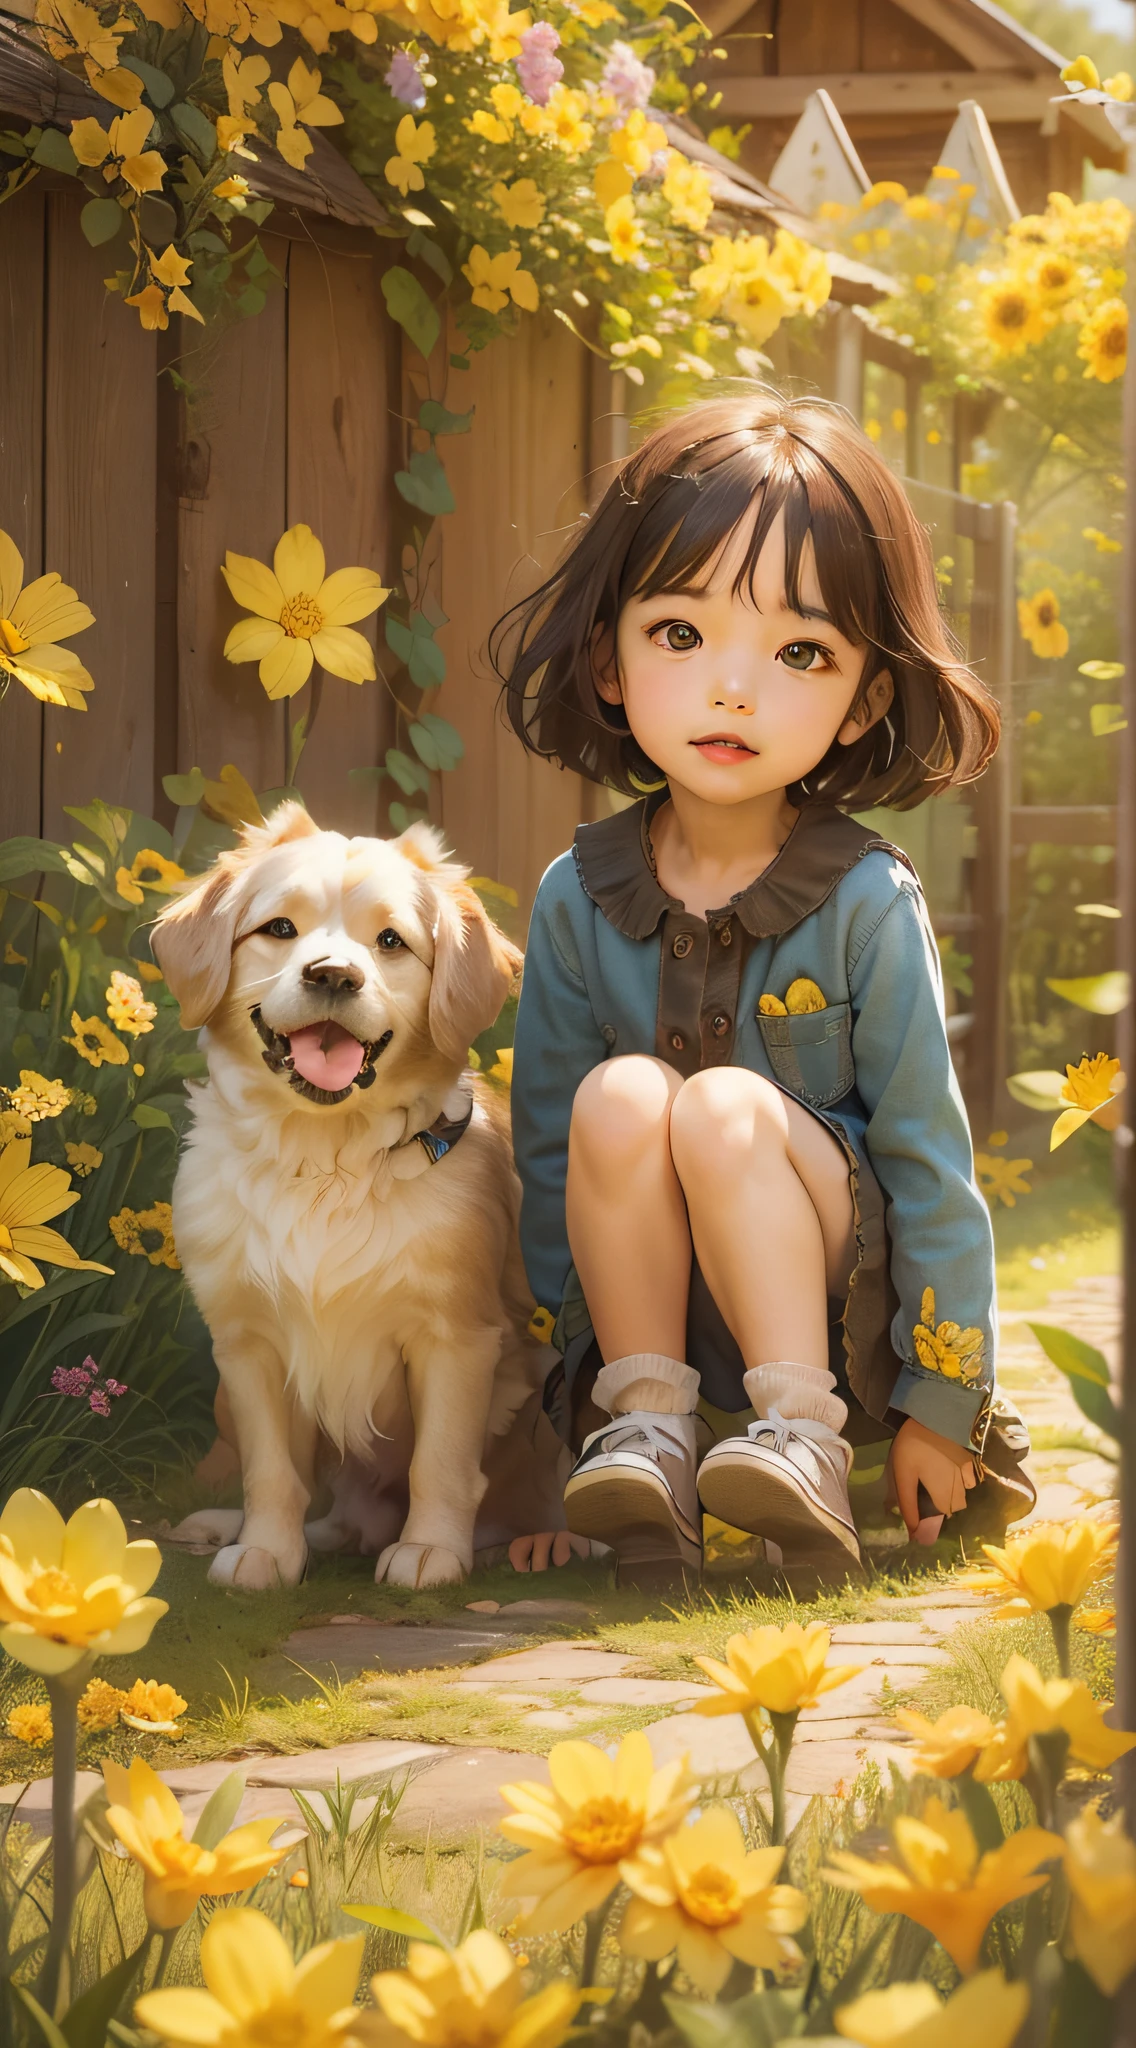 A charming ，Brunette and her cute puppy，Enjoy a lovely spring outing surrounded by beautiful yellow flowers and nature。Country lanes，Fenced hut，The illustration is a high-definition illustration in 4K resolution，With very detailed facial features and cartoon-style visuals。